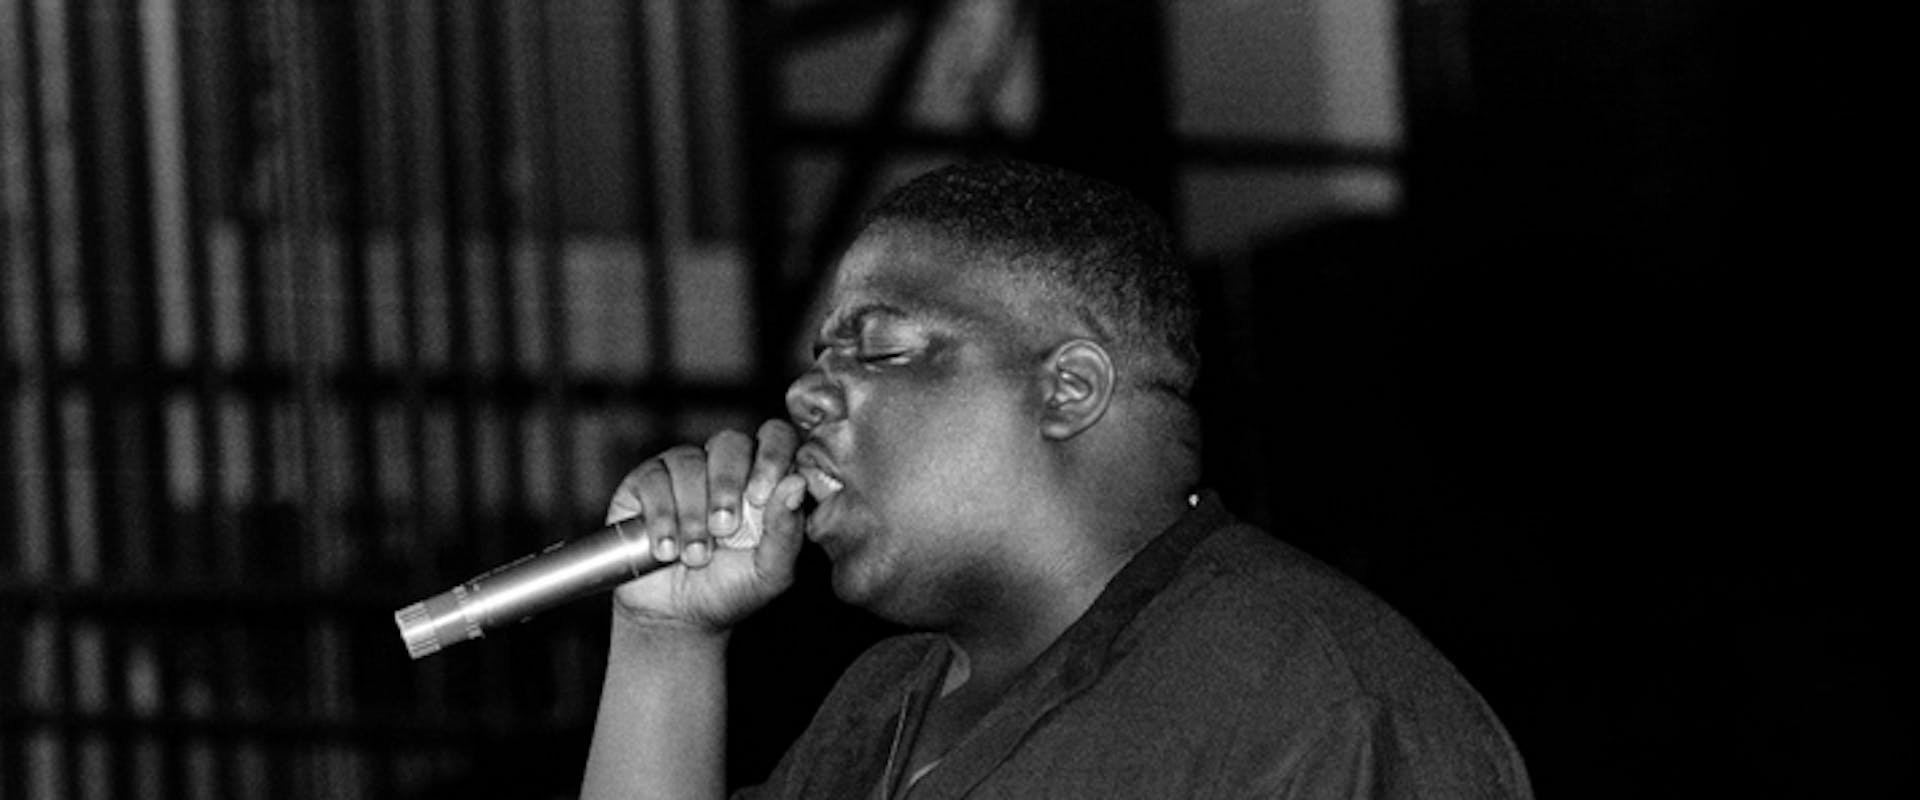 Notorious B.I.G. Live In Chicago
CHICAGO - SEPTEMBER 1994: Late rapper Notorious B.I.G., performs at the Riviera Theater in Chicago, Illinois in SEPTEMBER 1994. 